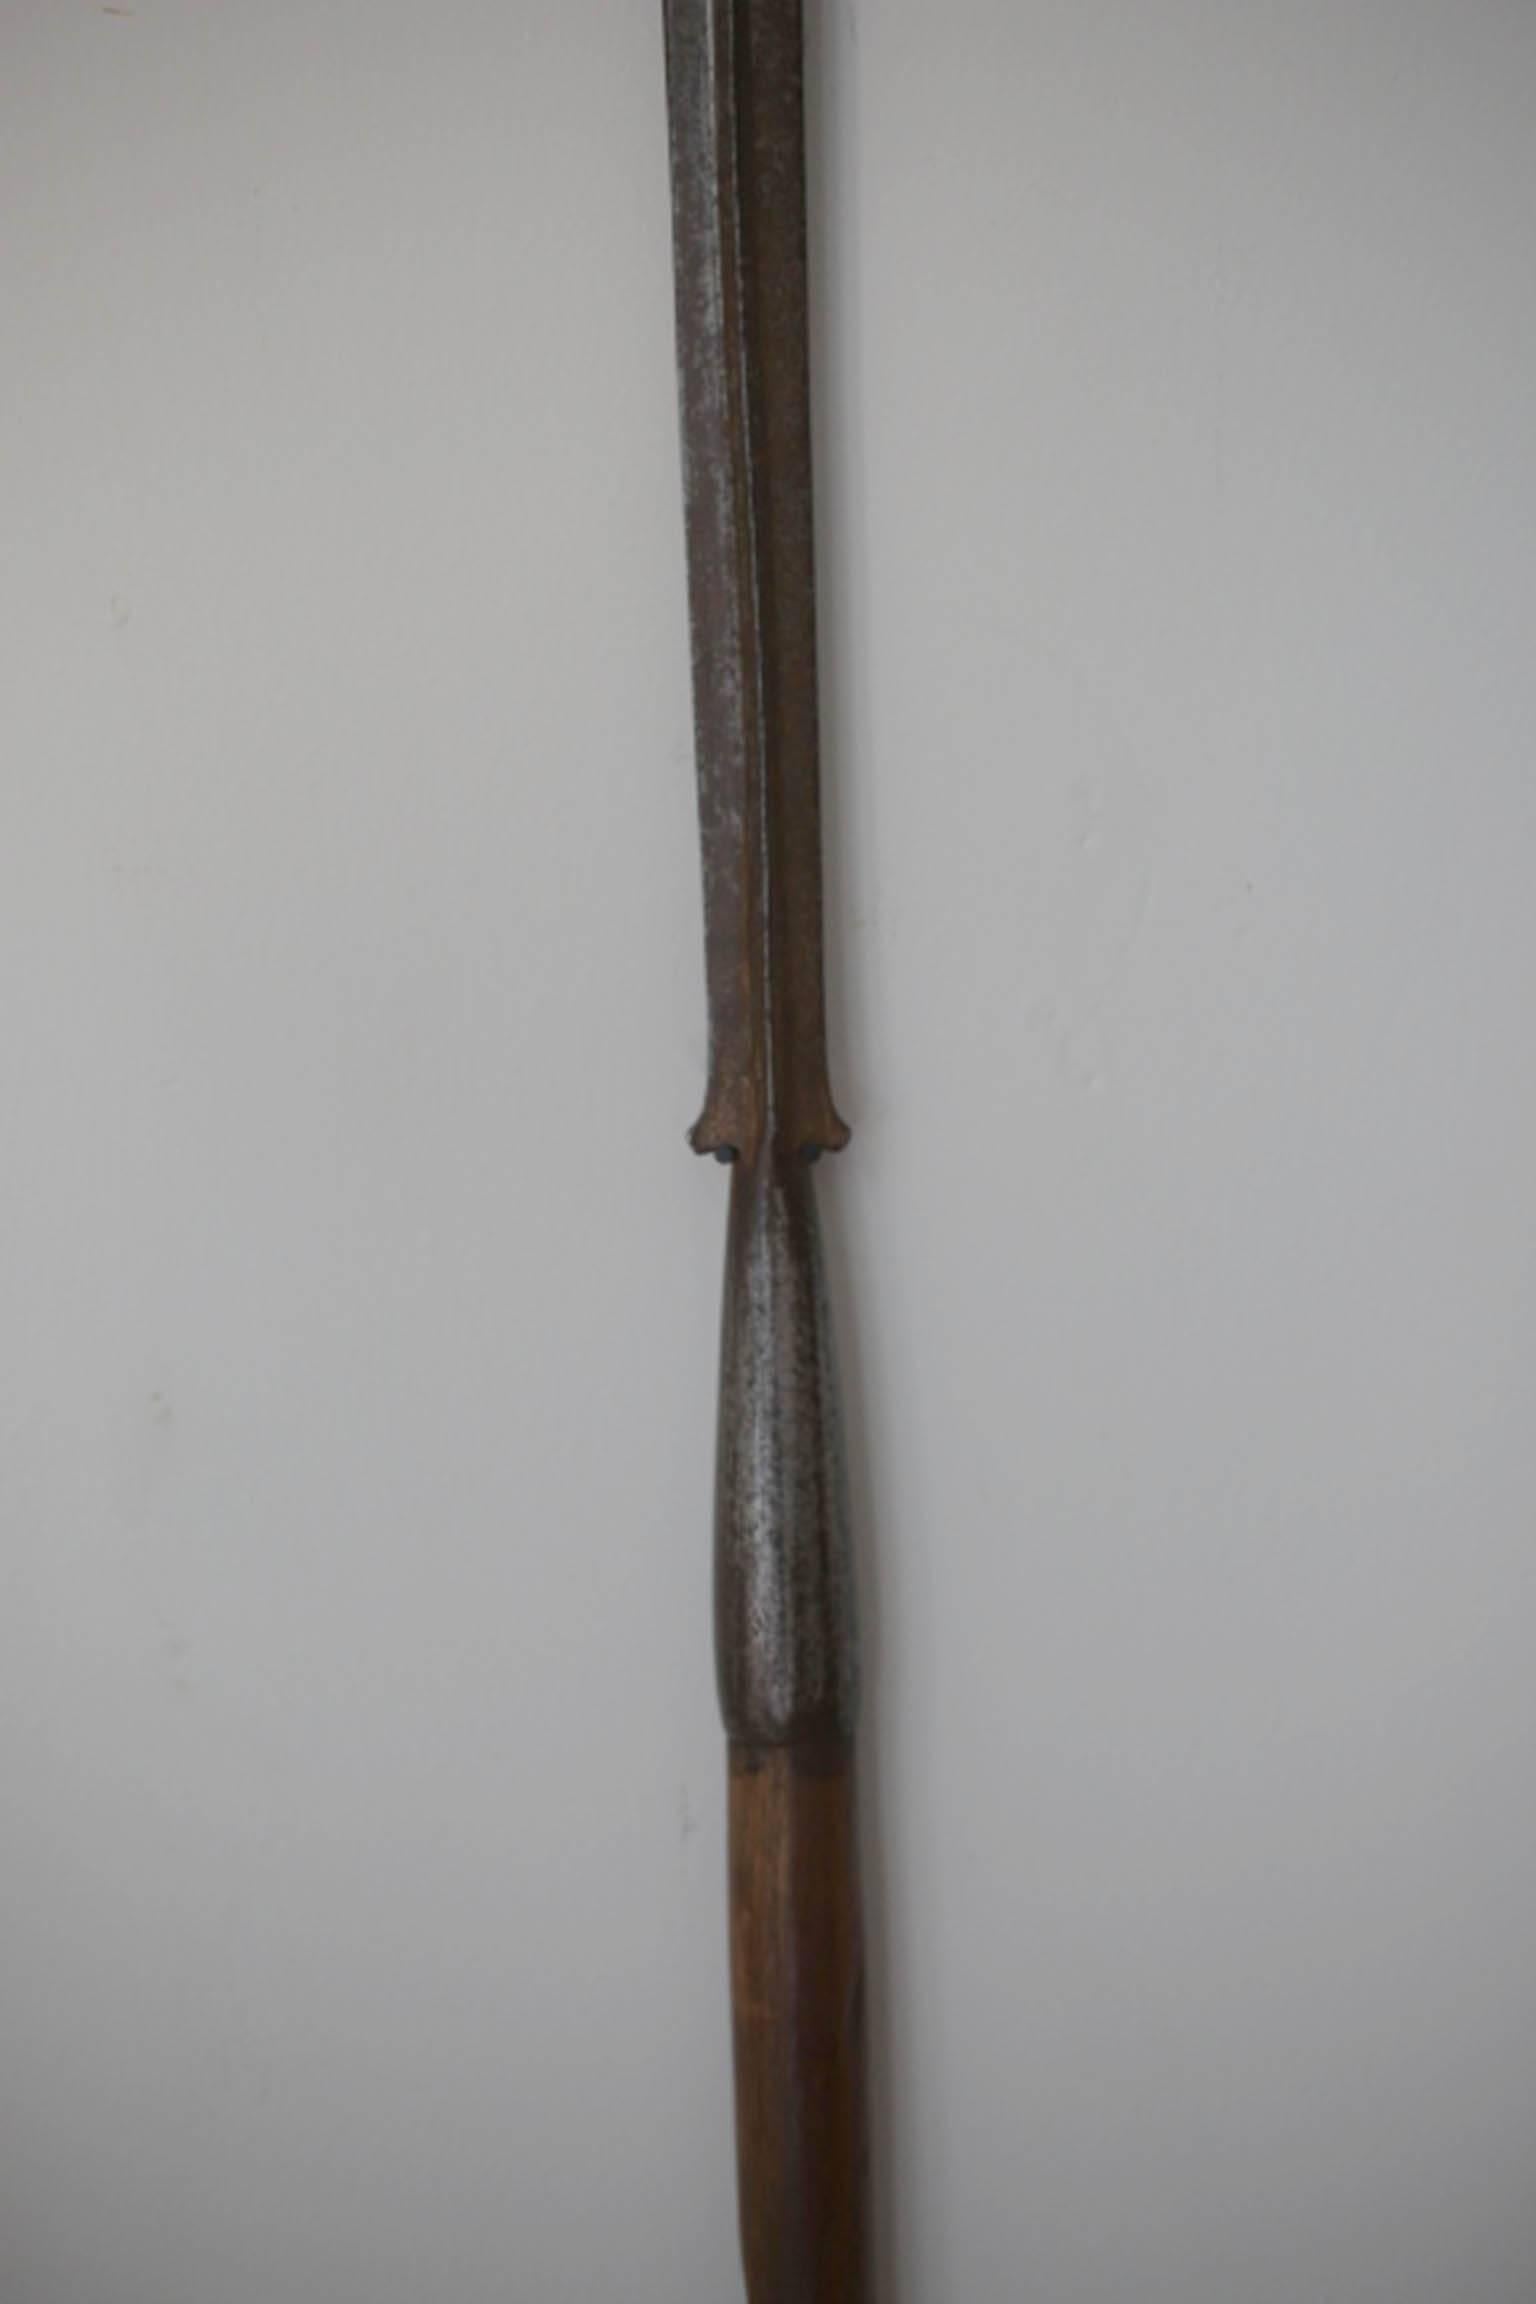 19th century lion hunting spear used by the Masaai people of Kenya, Africa. The spear is made of steel with beautiful antique wooden handle.